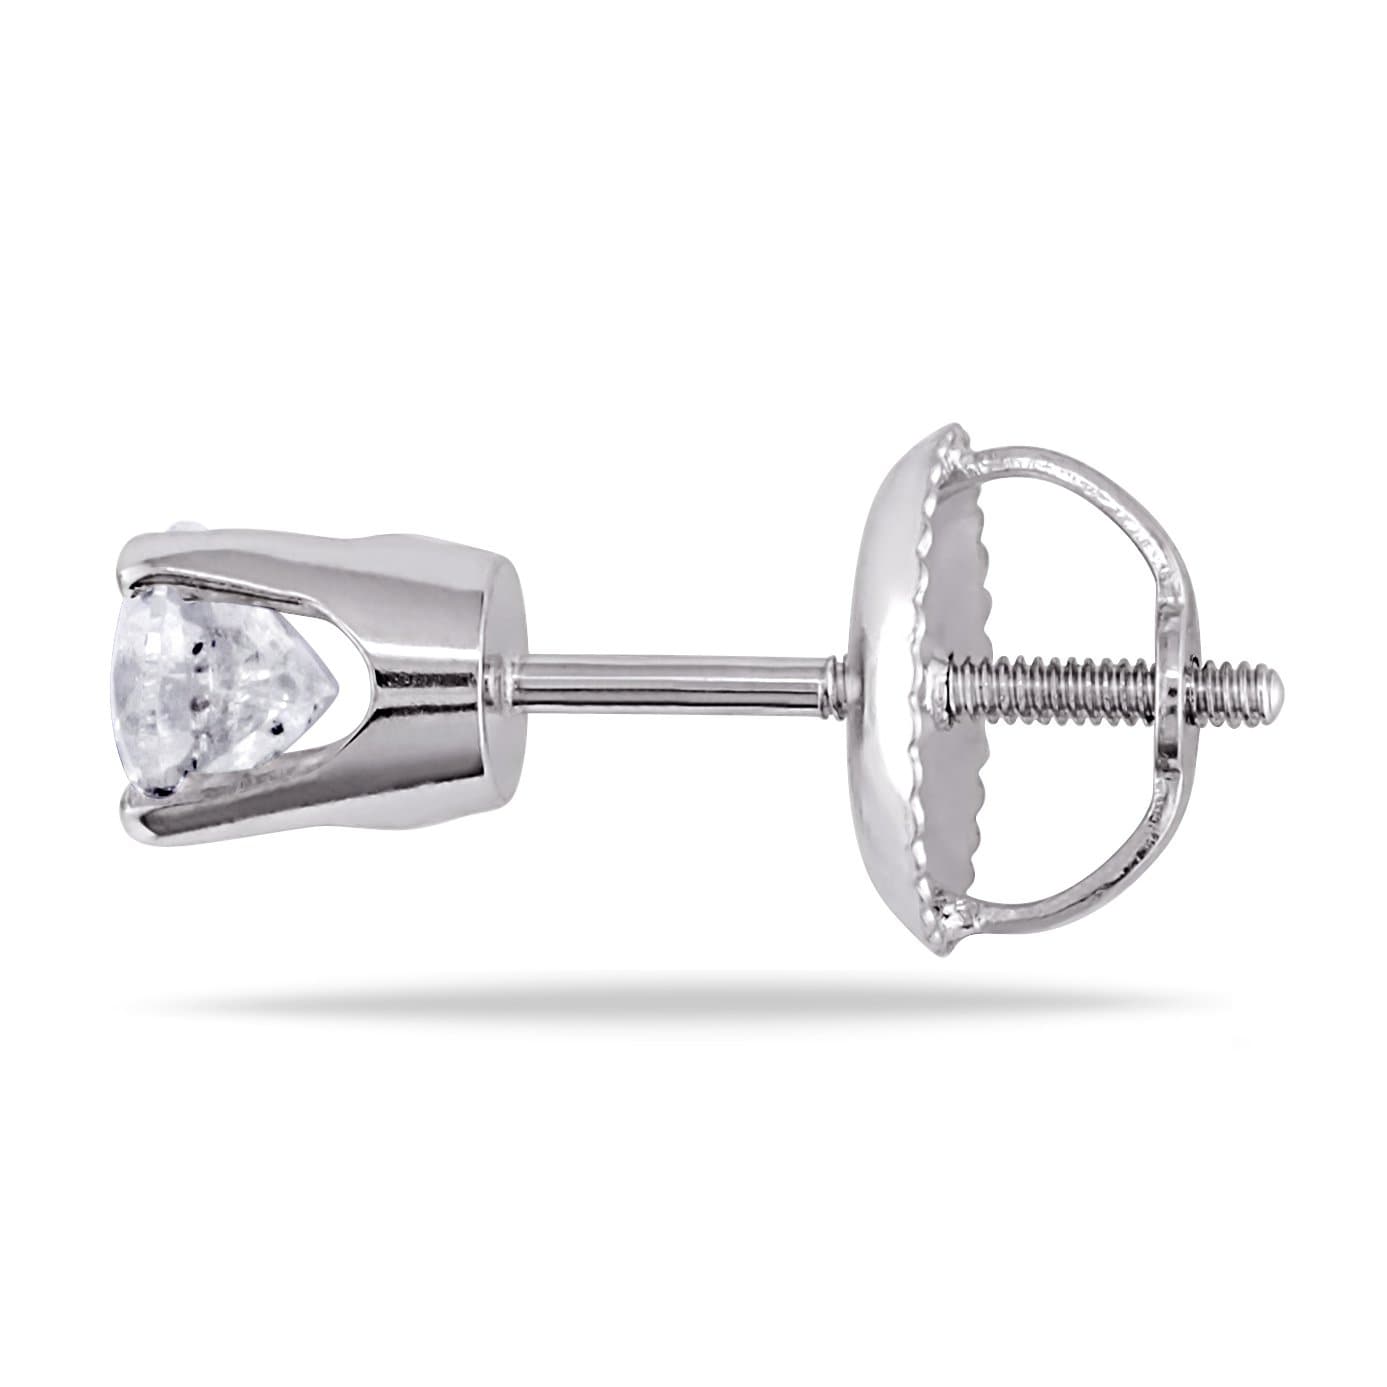 1/2ct TDW Solitaire Earrings with Screwbacks